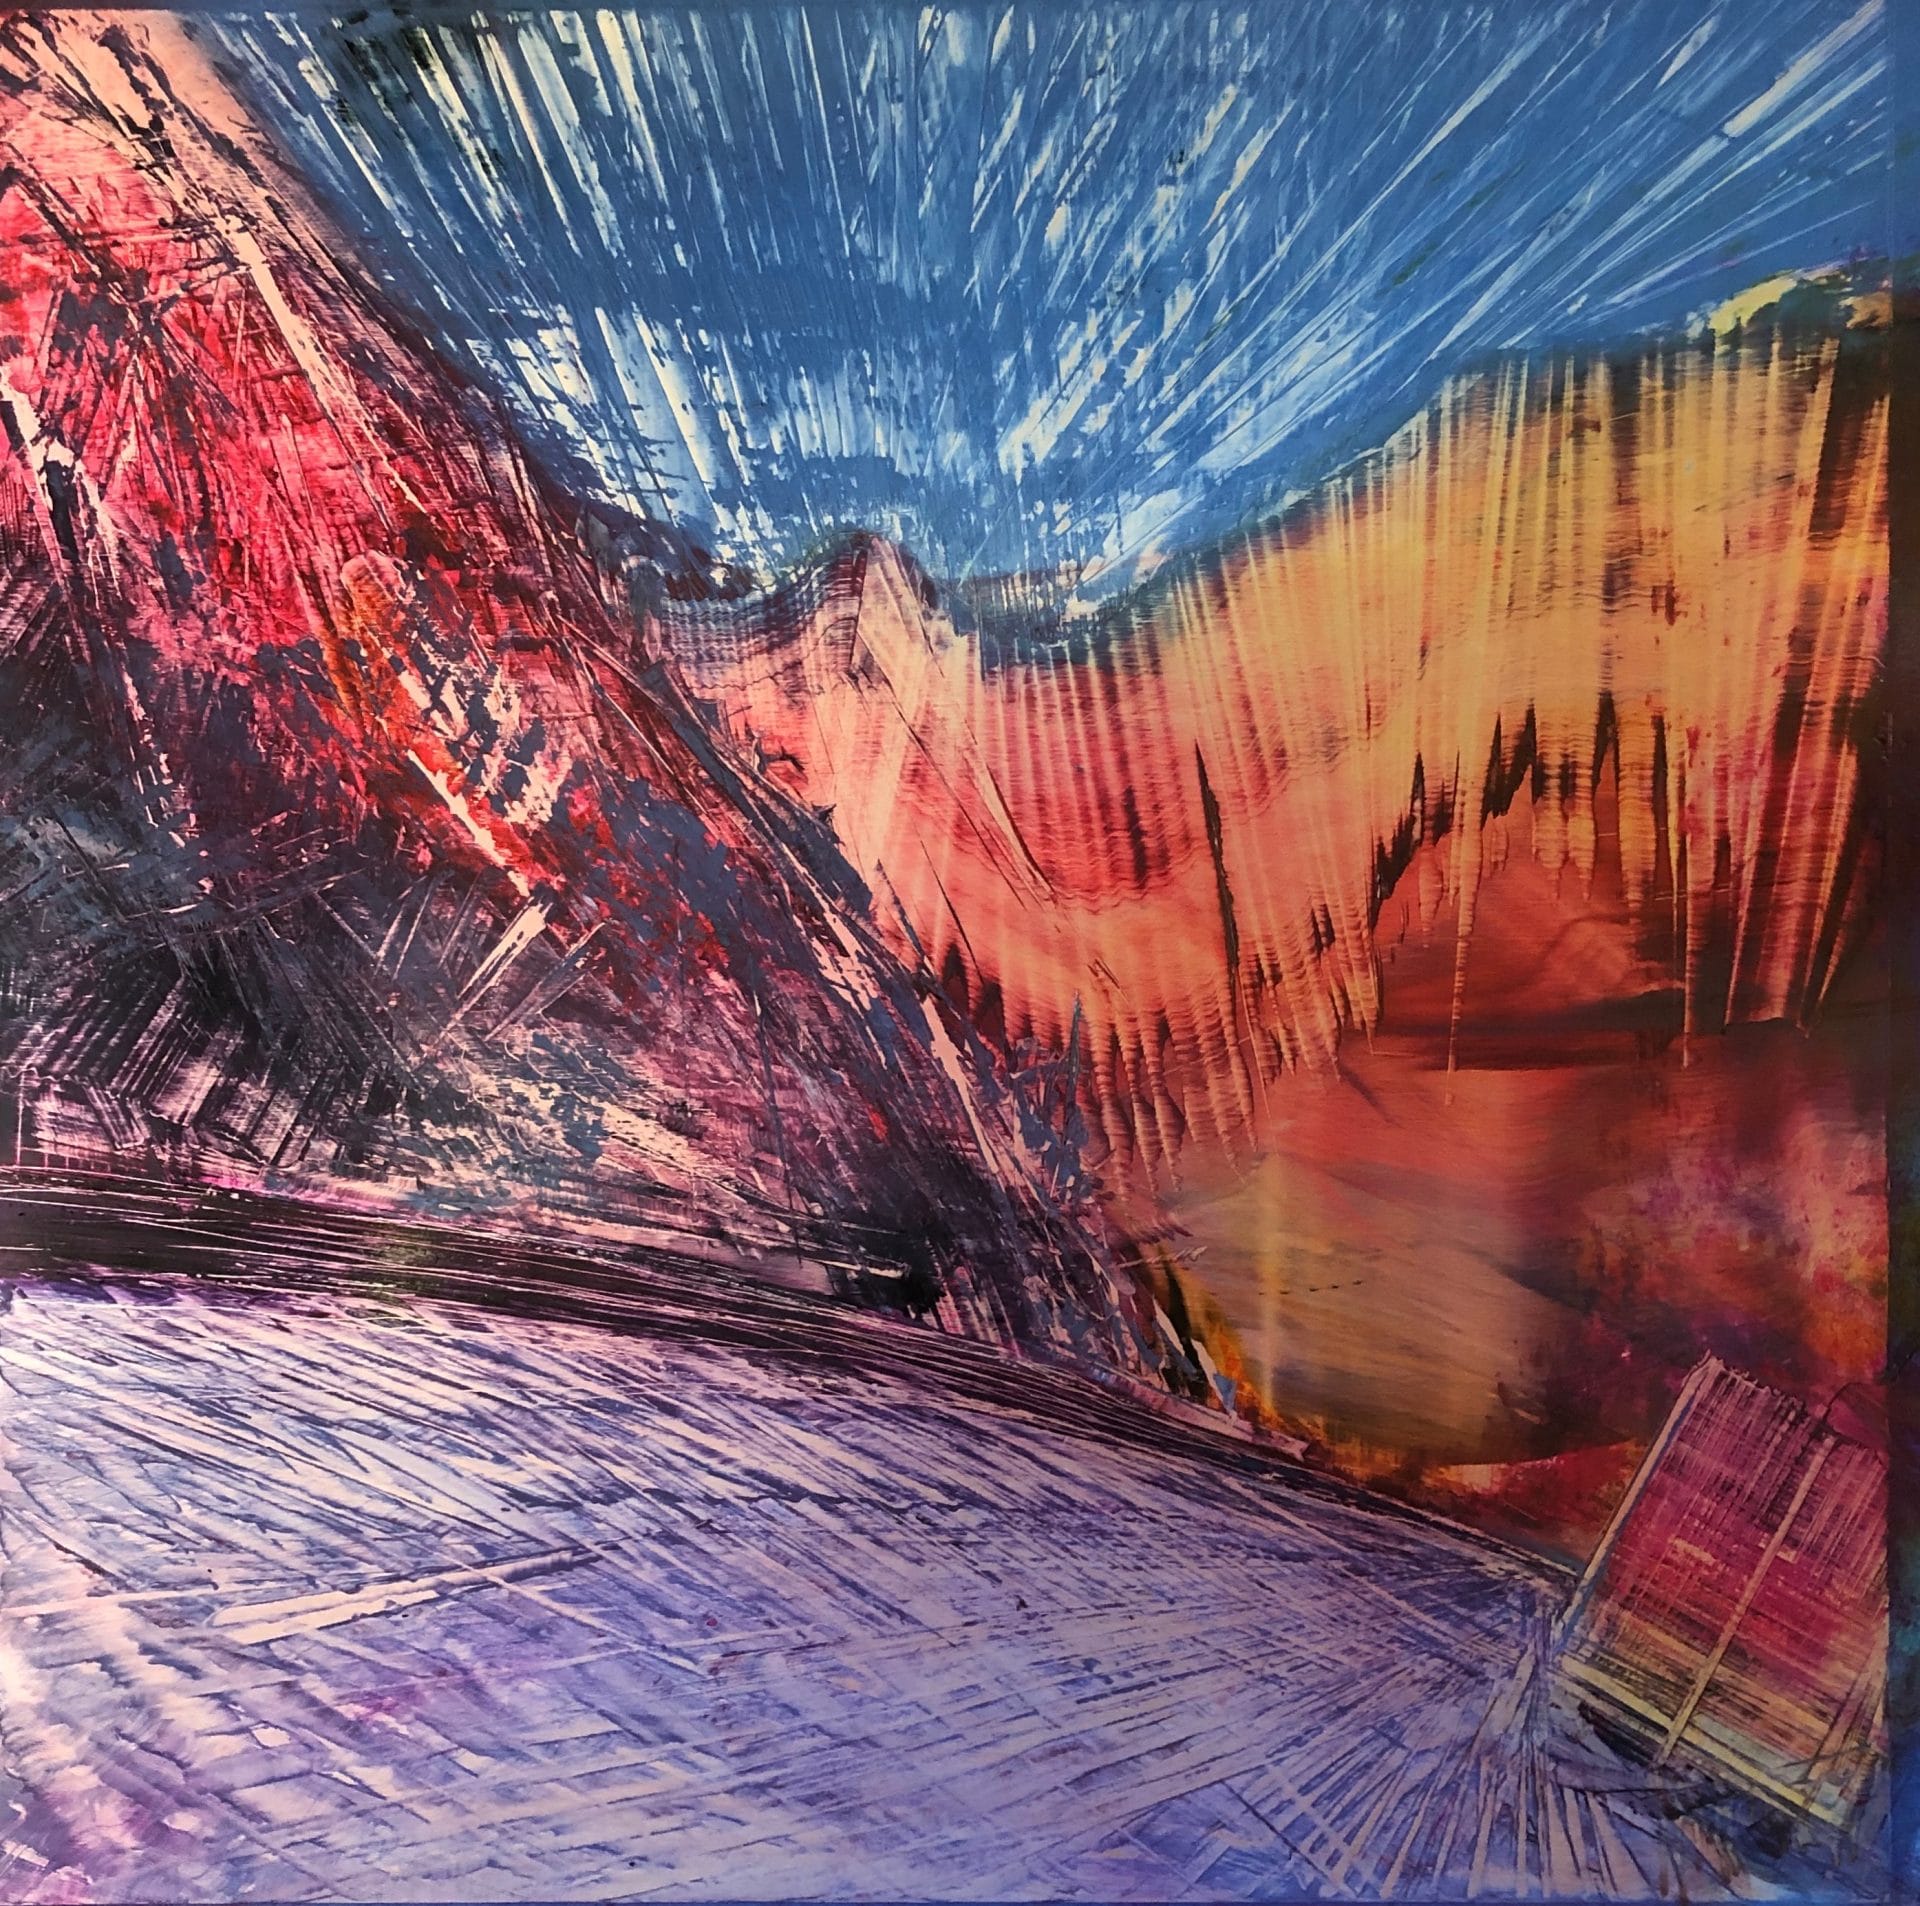 Oil painting by Cynthia McLoughlin, blue sky over a purple road winding through a red and amber abstract mountain pass.